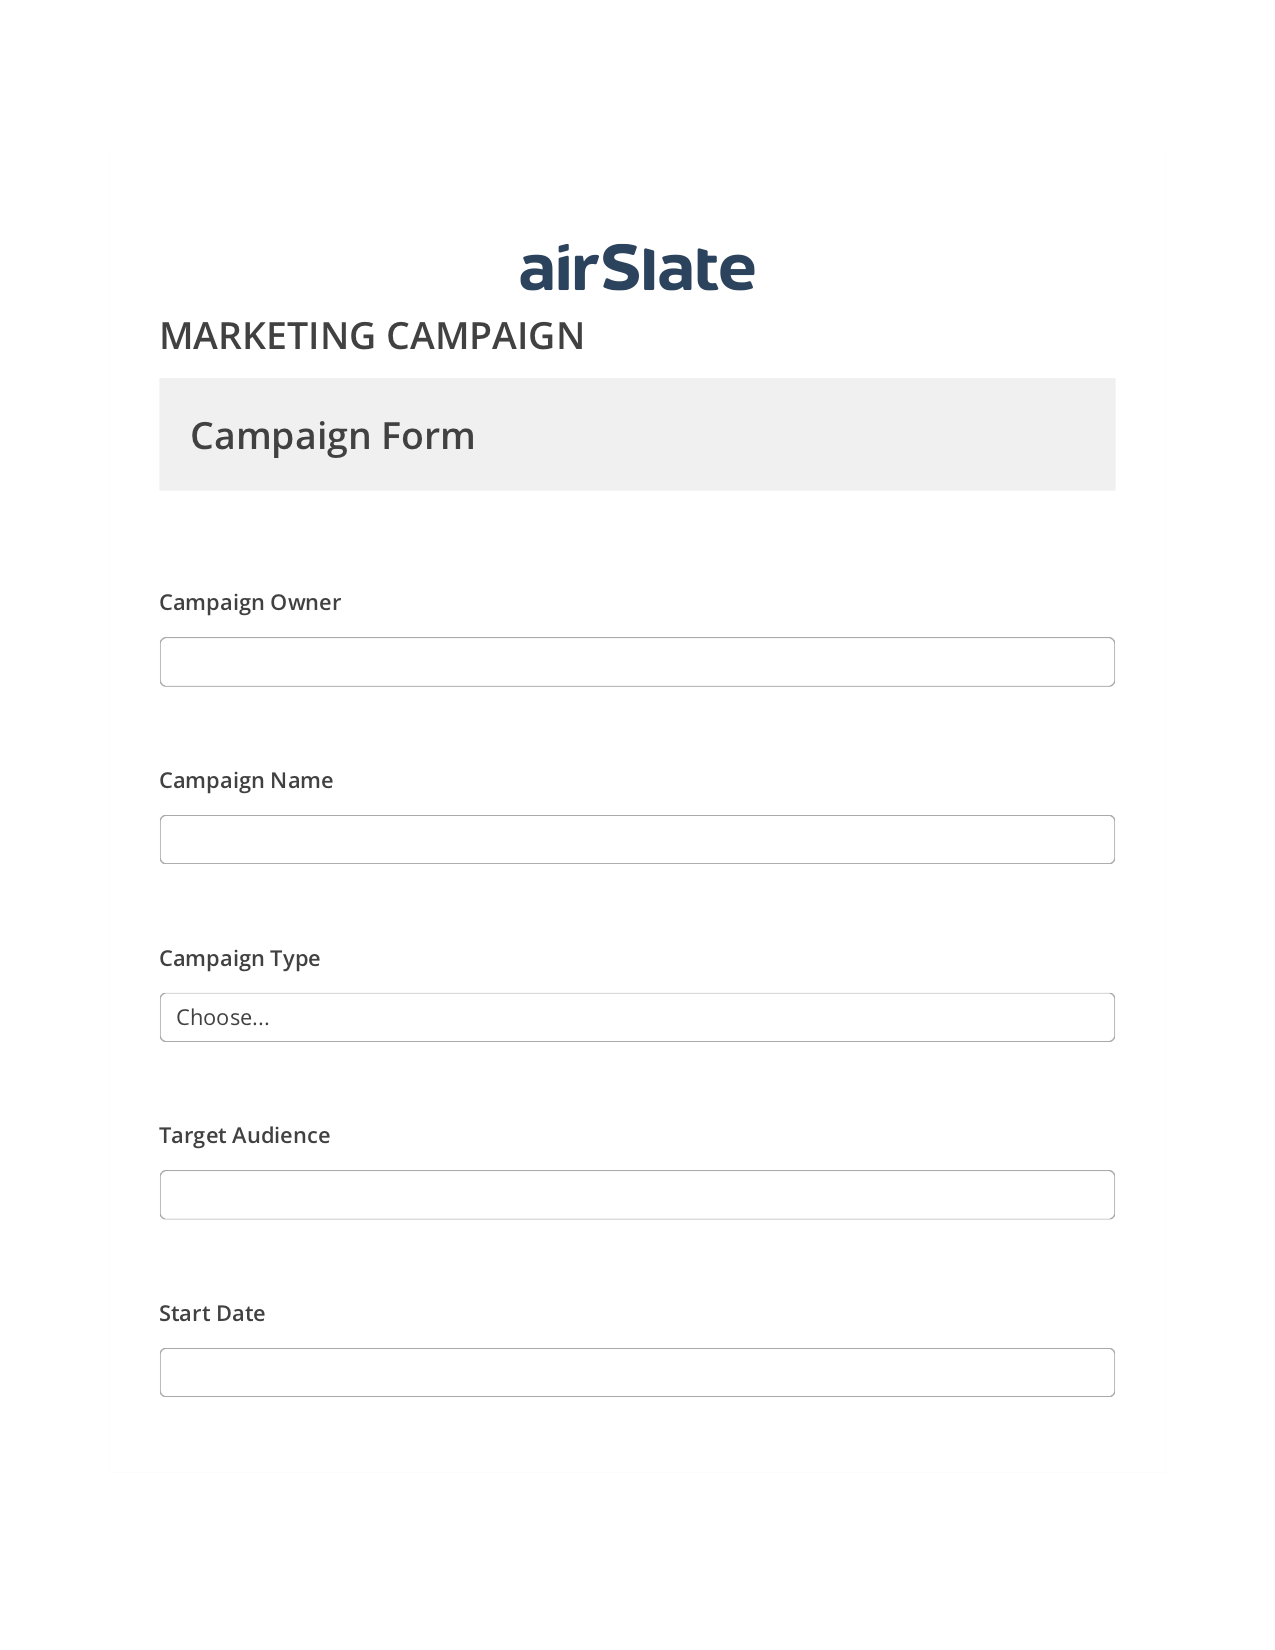 Marketing Campaign Flow Pre-fill from Excel Spreadsheet Bot